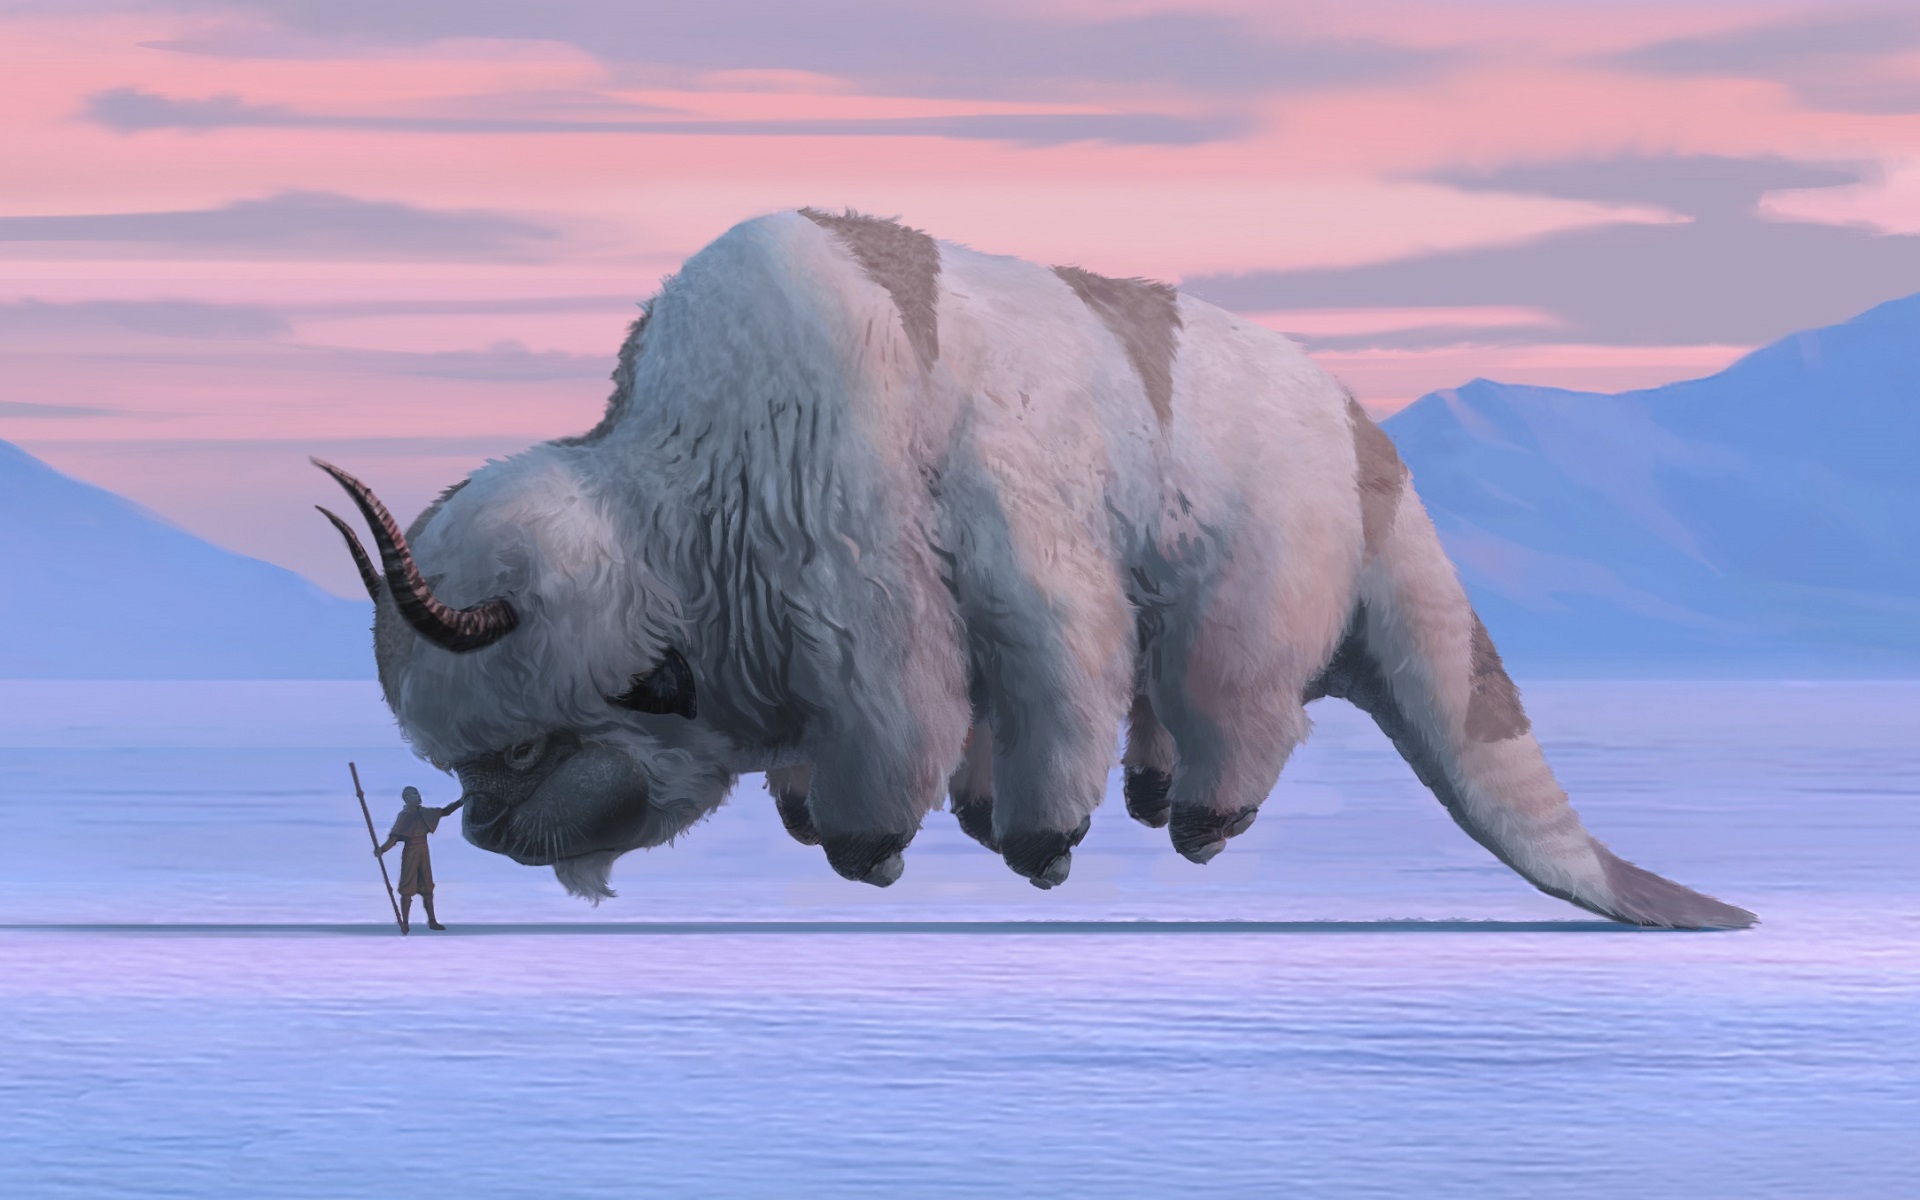 General 1920x1200 artwork fantasy art Avatar Avatar: The Last Airbender Aang Appa bison snow winter animals fictional creatures fictional character floating horns